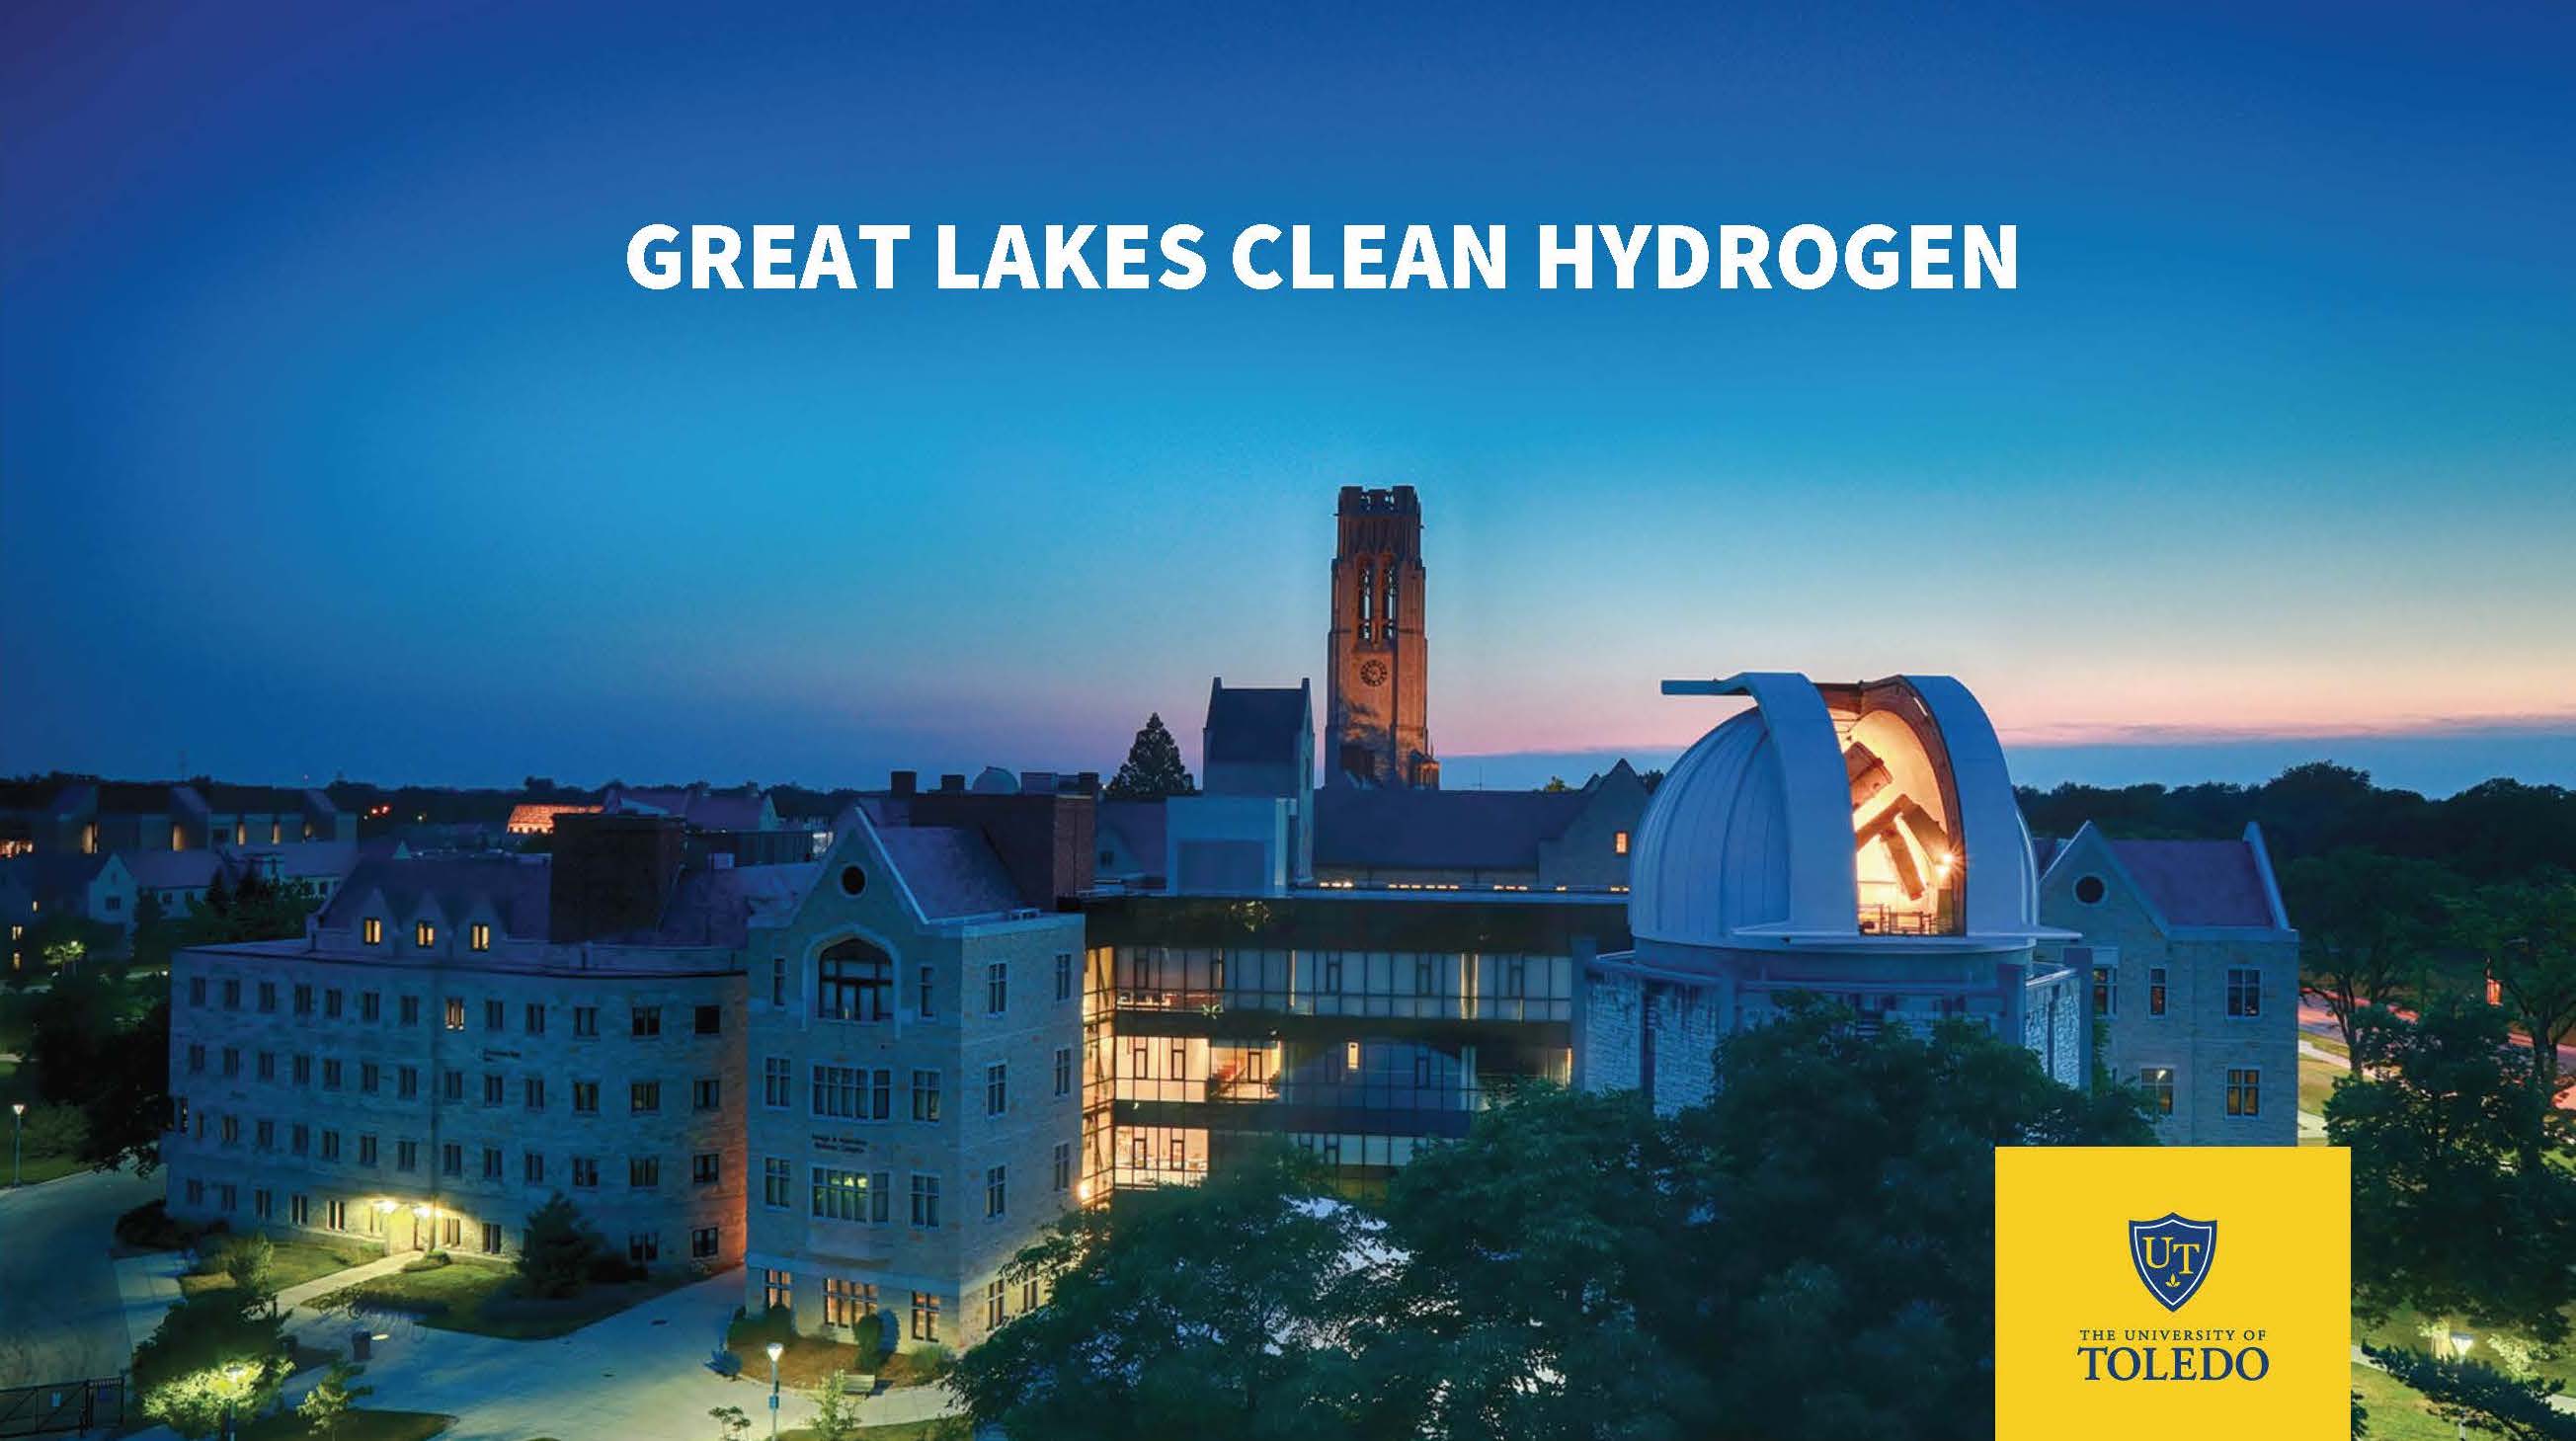 Image for the Great Lakes Hydrogen webpage